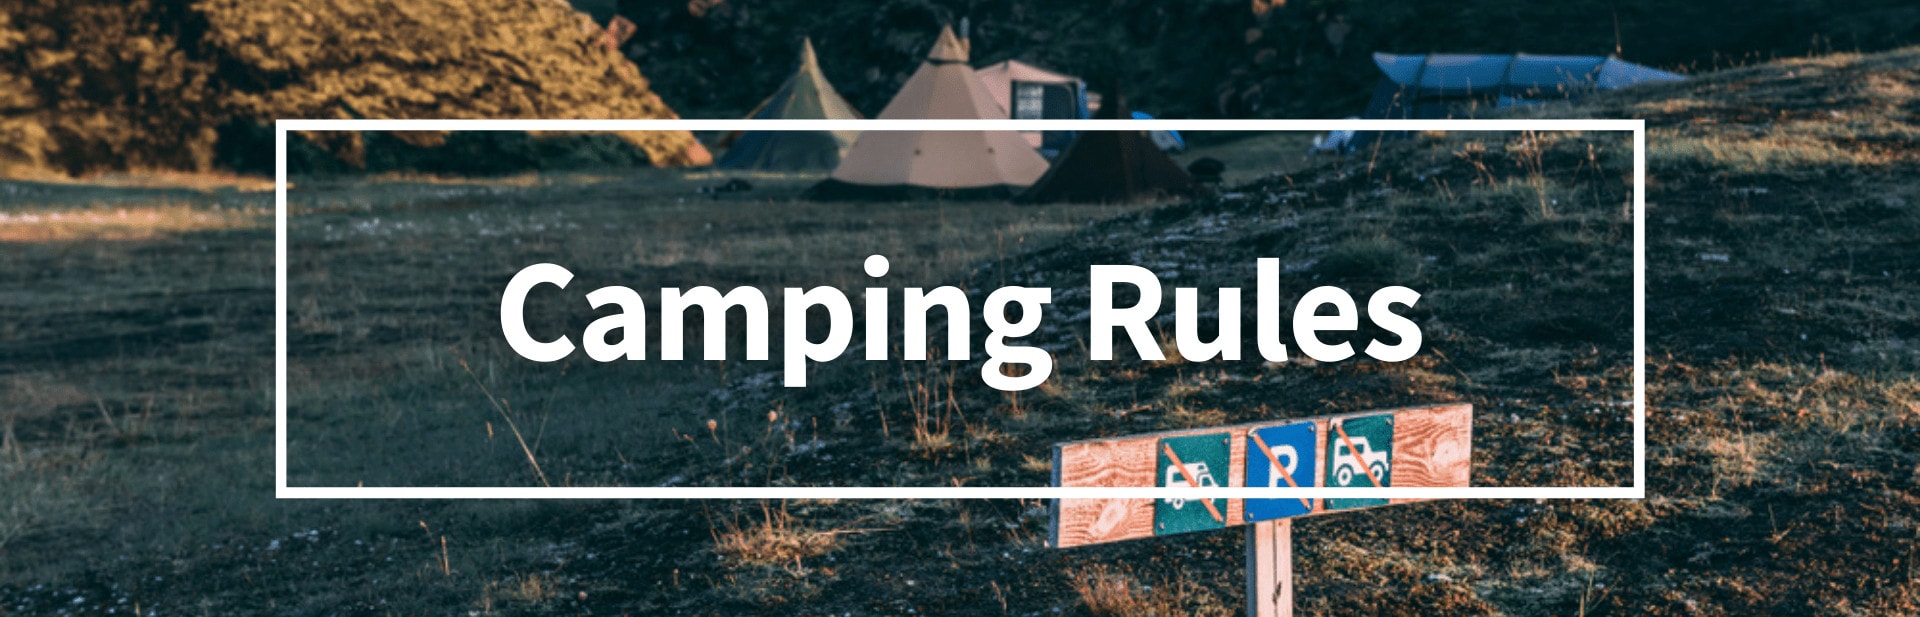 Camping Manners Matter: How to Be the Perfect Campground Neighbor